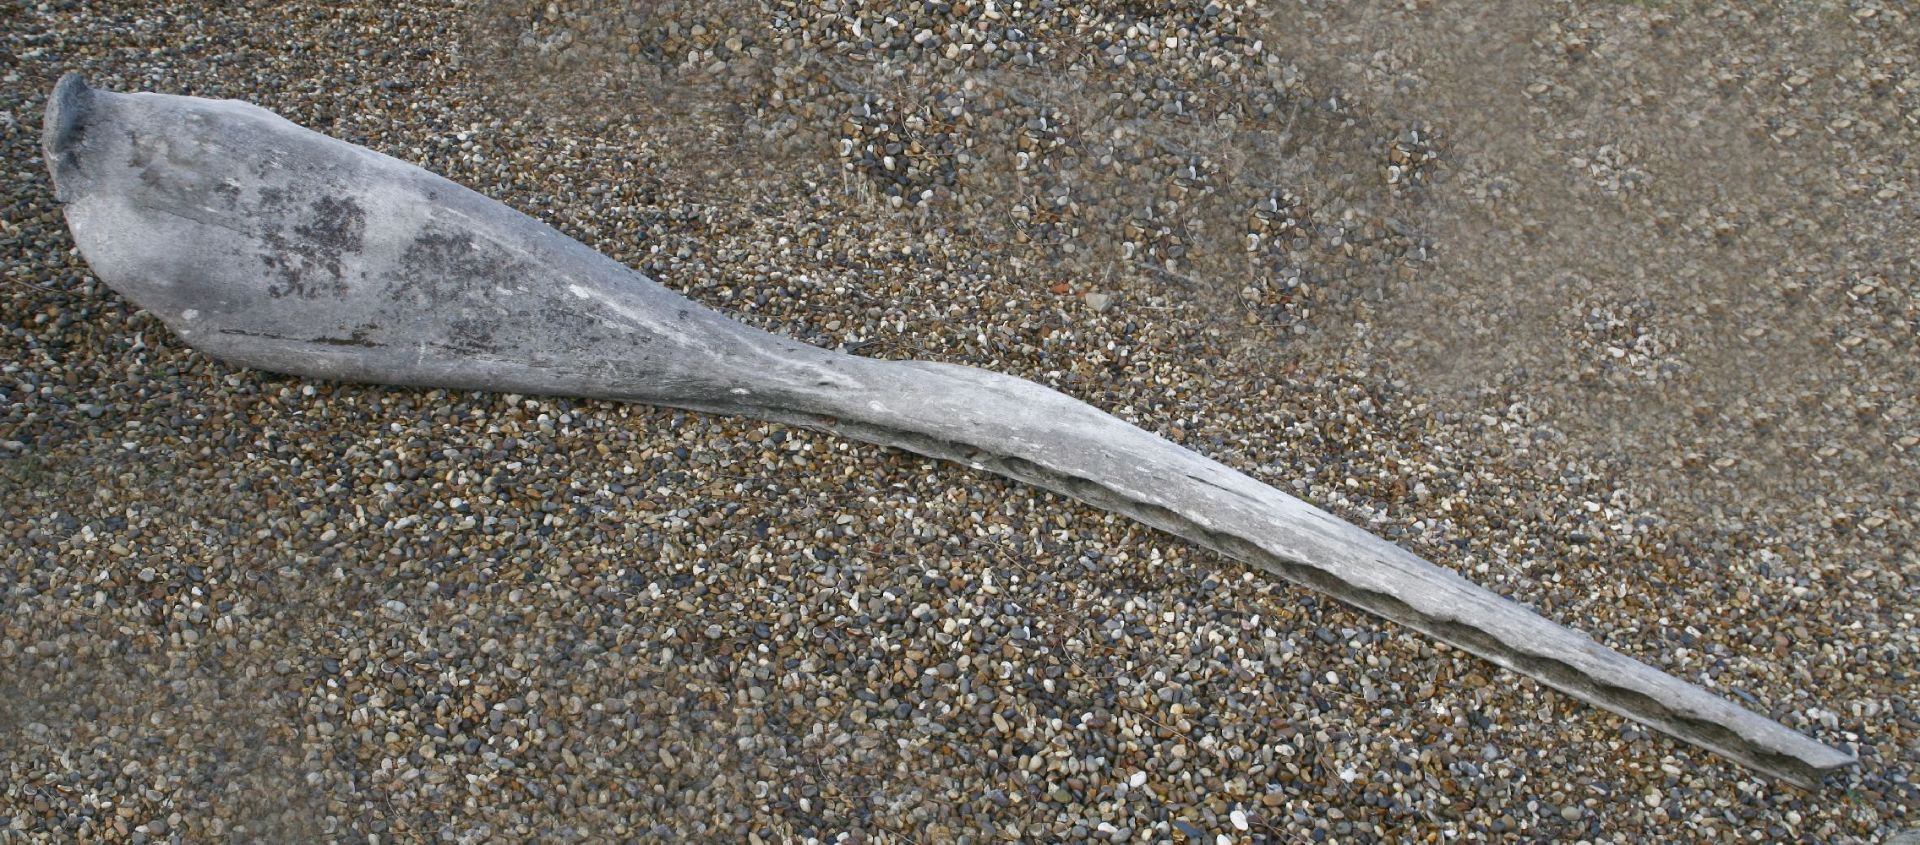 A sperm whale jawbone,early 20th century, found at Sconser, Isle of Skye,346cm longComplete with